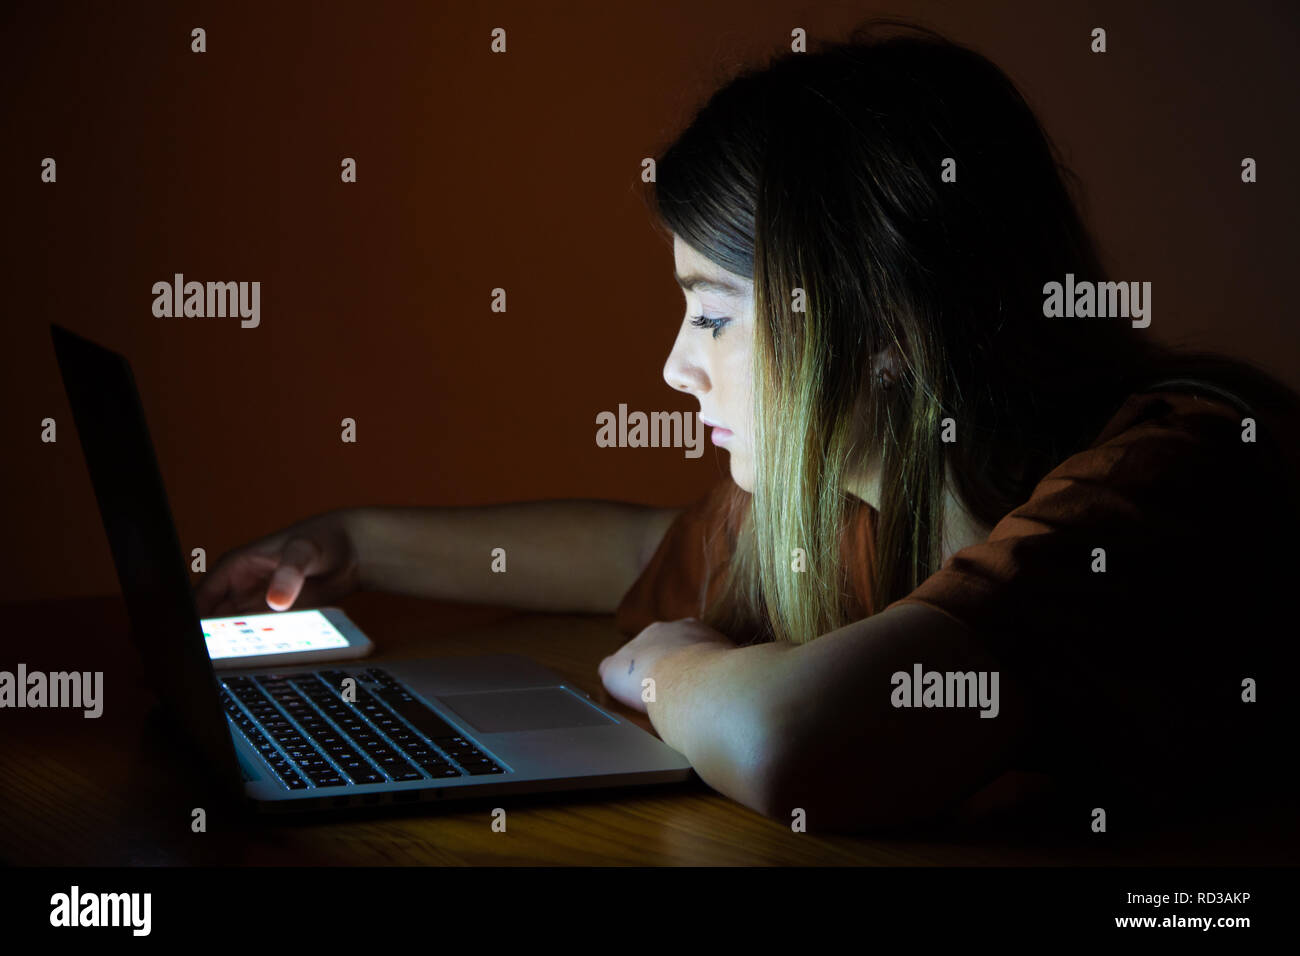 A pretty teenage girl using her laptop and mobile phone at night. Stock Photo